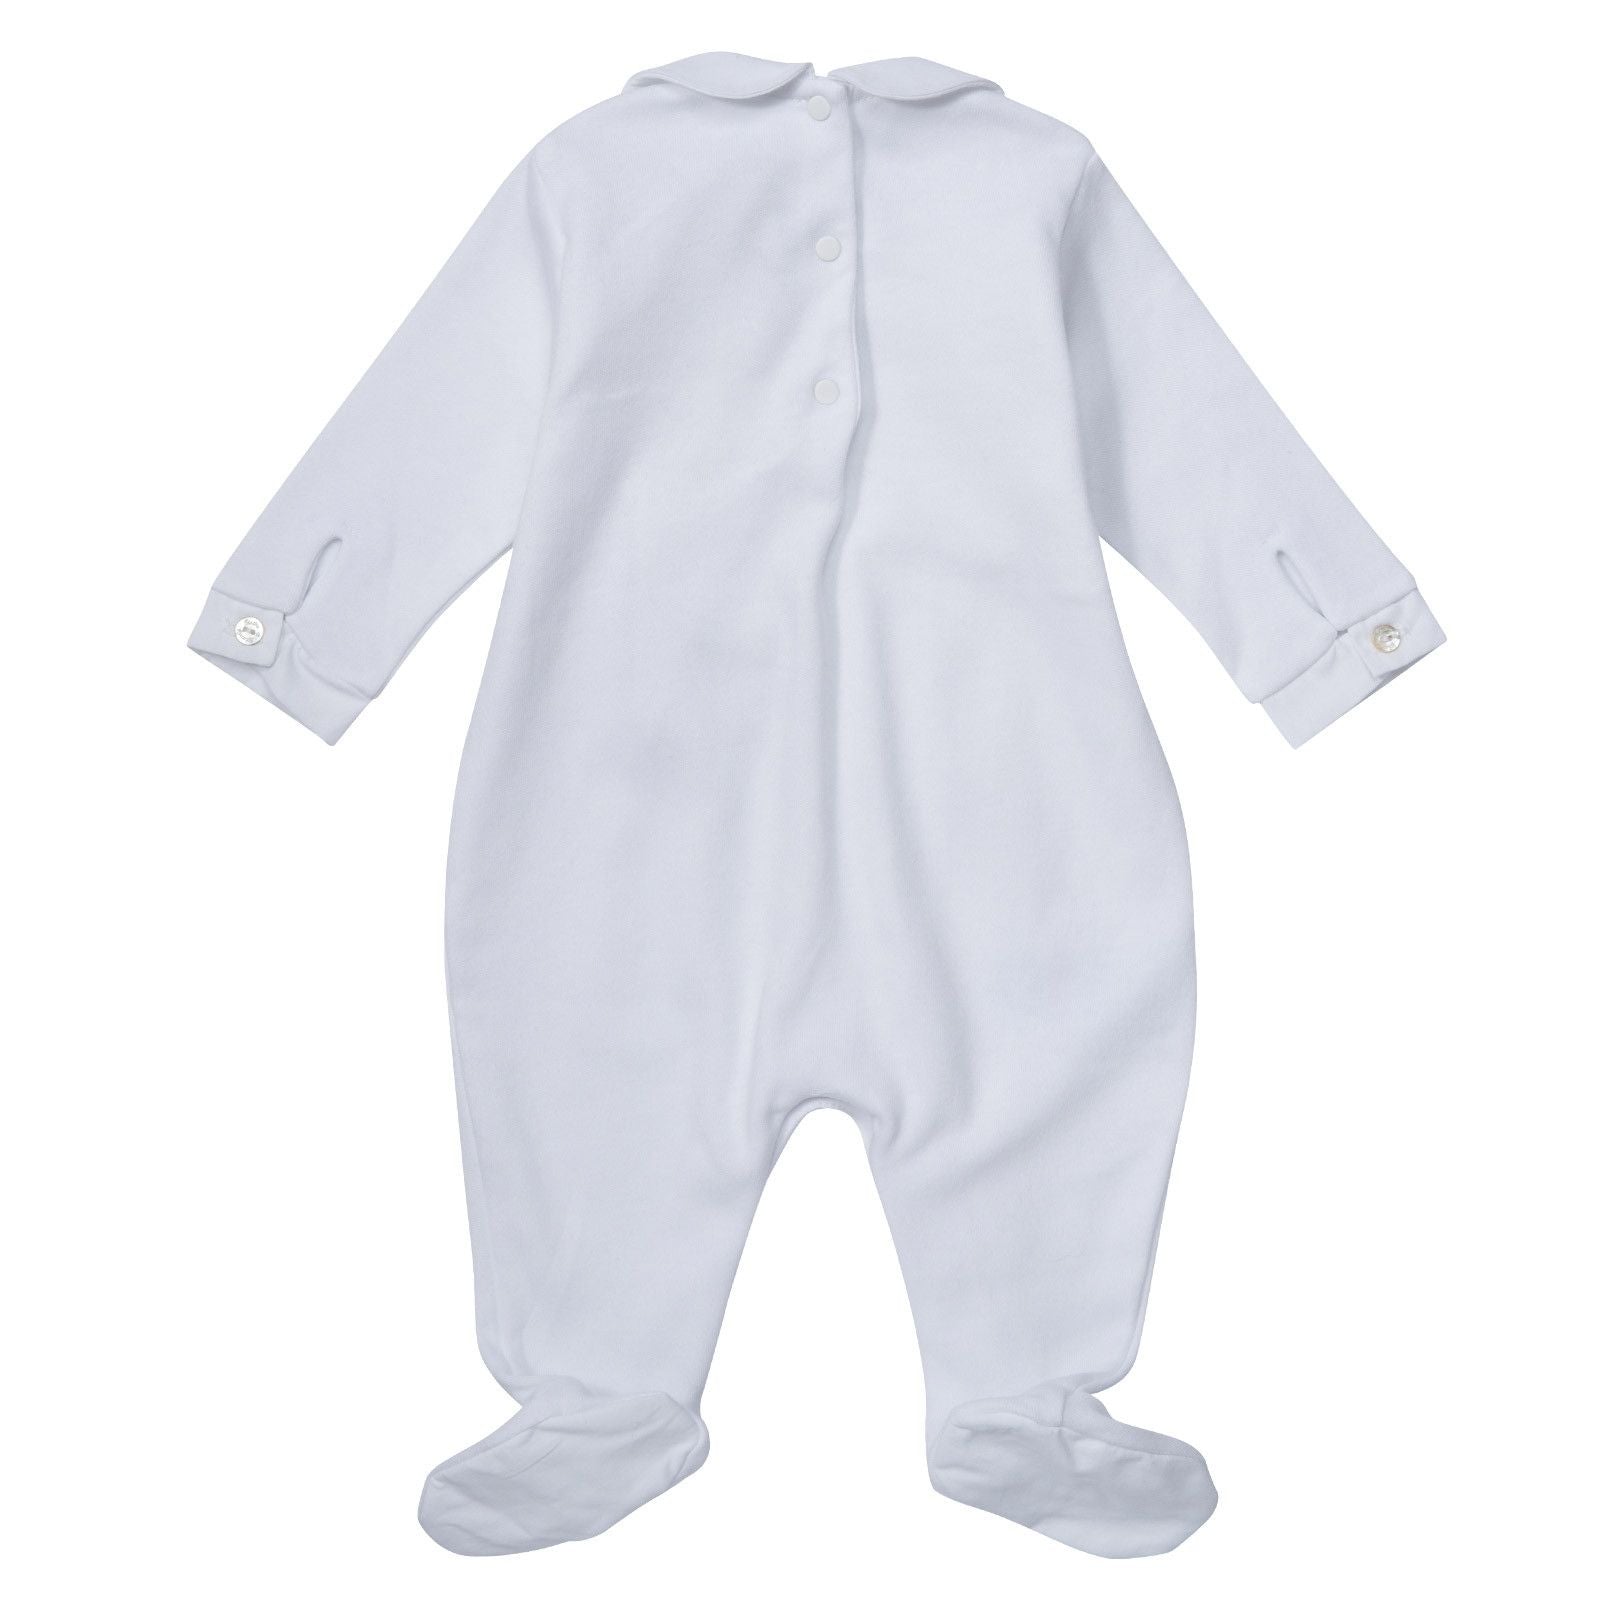 Baby White Babygrow with Embroidered Logo - CÉMAROSE | Children's Fashion Store - 2